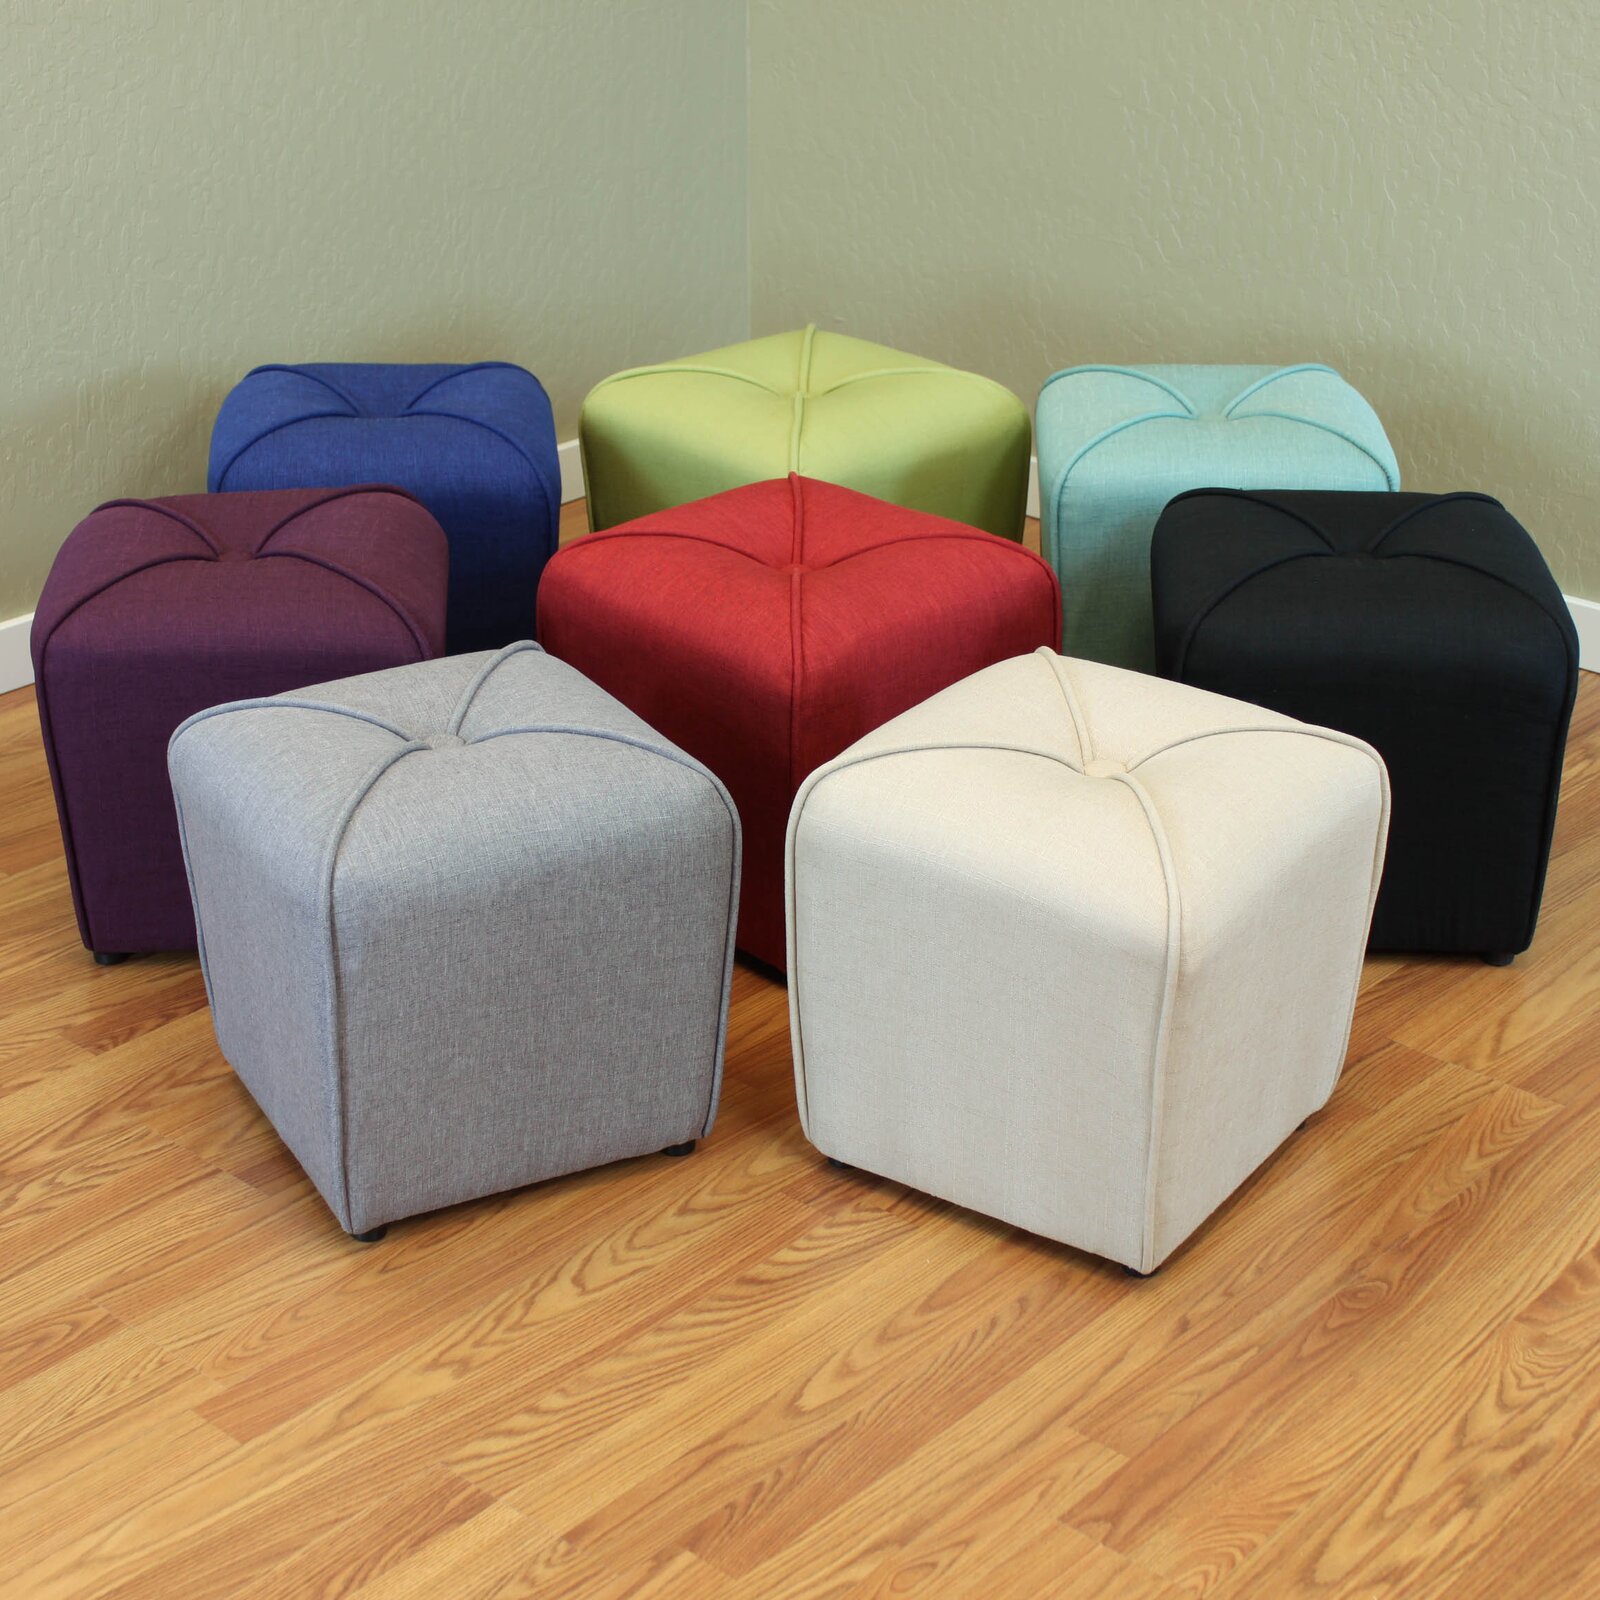 Quane 16.5" Tufted Square Cube Ottoman, Shape: Square, Weight Capacity: 150 - image 3 of 5